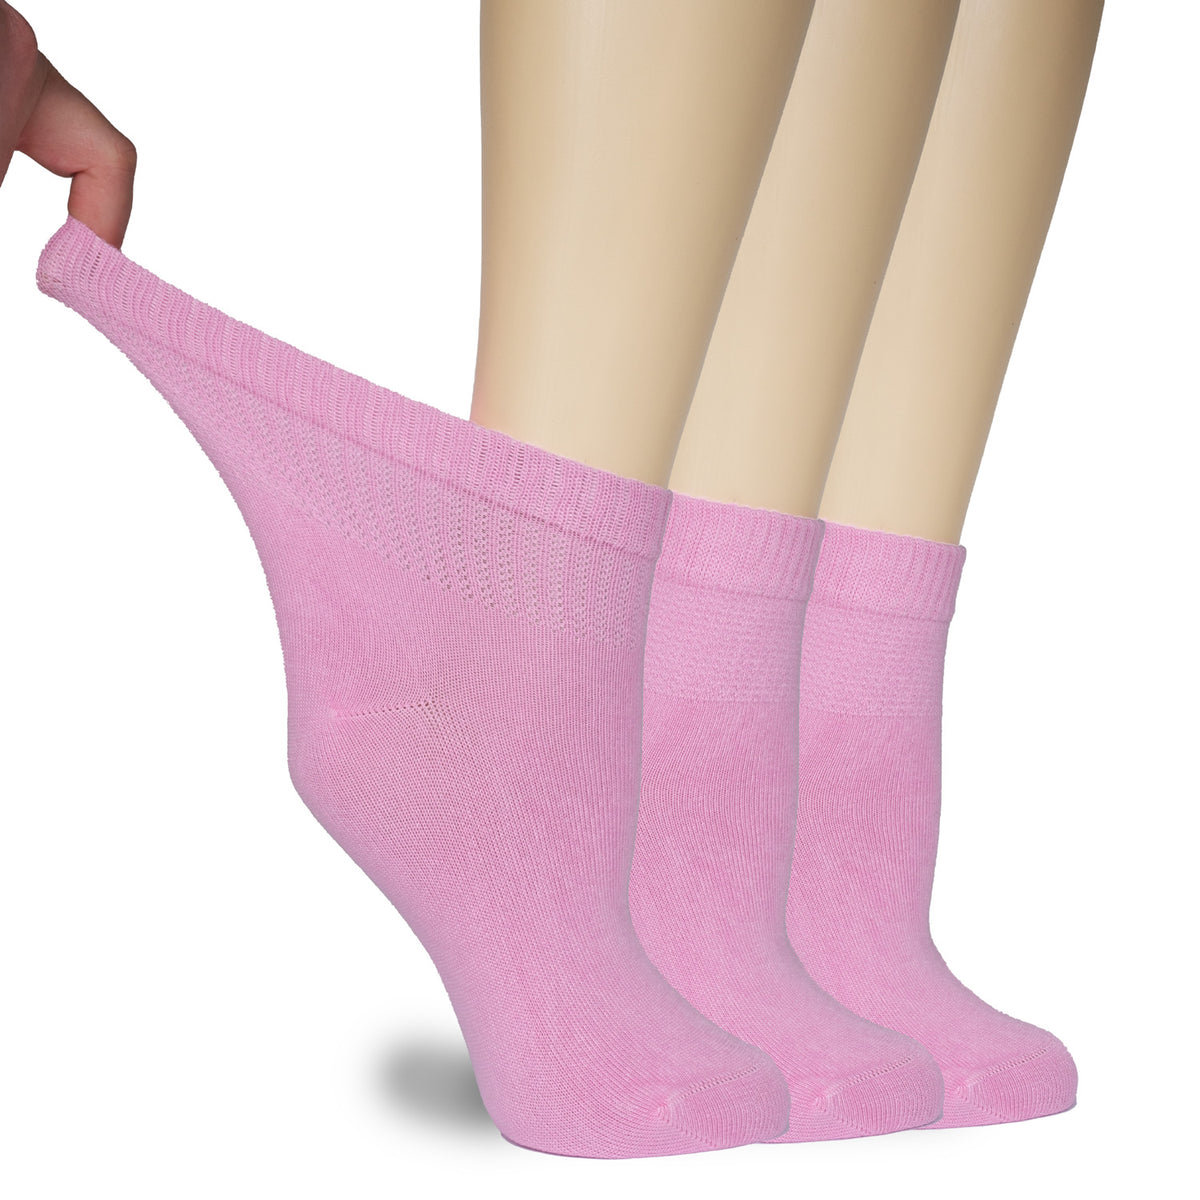 The image displays a woman's foot wearing three pink Women's Diabetic Bamboo Ankle Socks, designed for comfort and health.